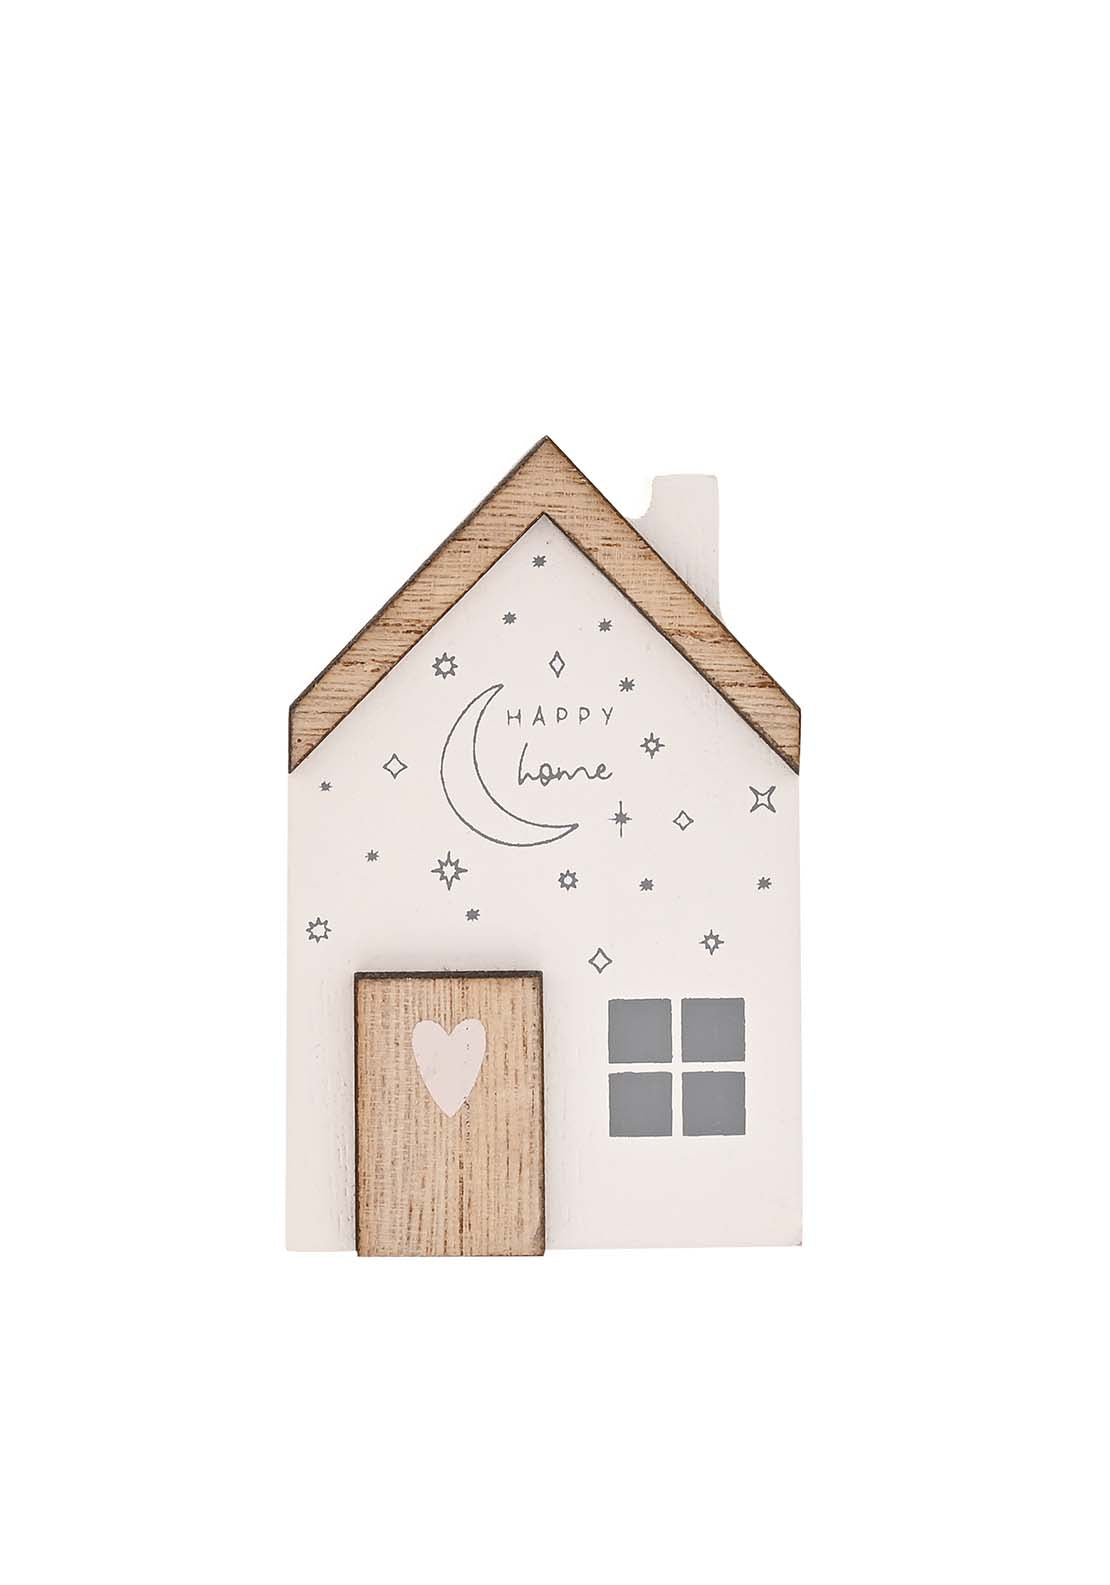 The Home Collection Mini House Happy Home 1 Shaws Department Stores